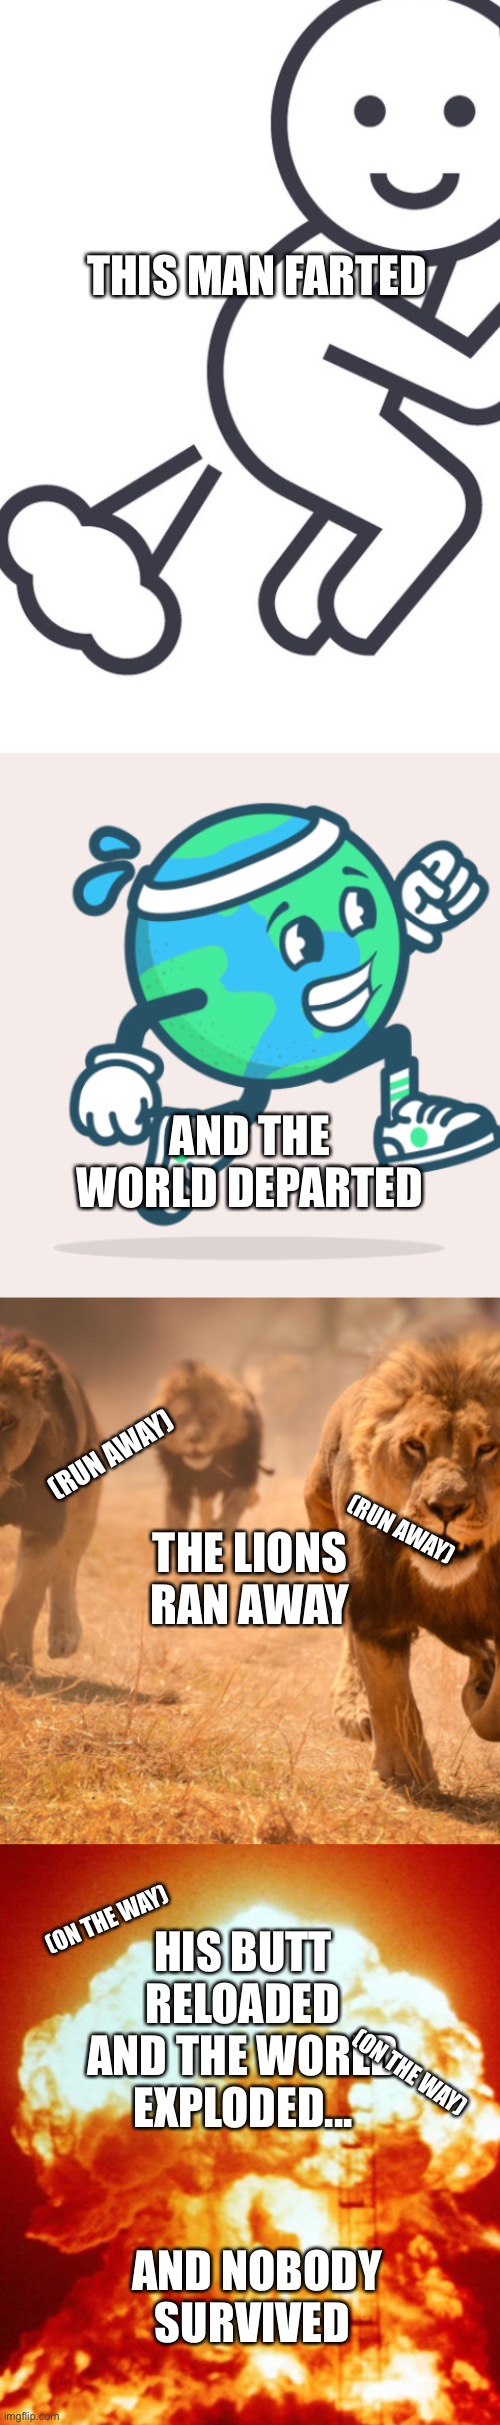 Like my song? | THIS MAN FARTED; AND THE WORLD DEPARTED; (RUN AWAY); THE LIONS RAN AWAY; (RUN AWAY); HIS BUTT RELOADED AND THE WORLD EXPLODED... (ON THE WAY); (ON THE WAY); AND NOBODY SURVIVED | image tagged in fart,song,lions,world,explosion | made w/ Imgflip meme maker